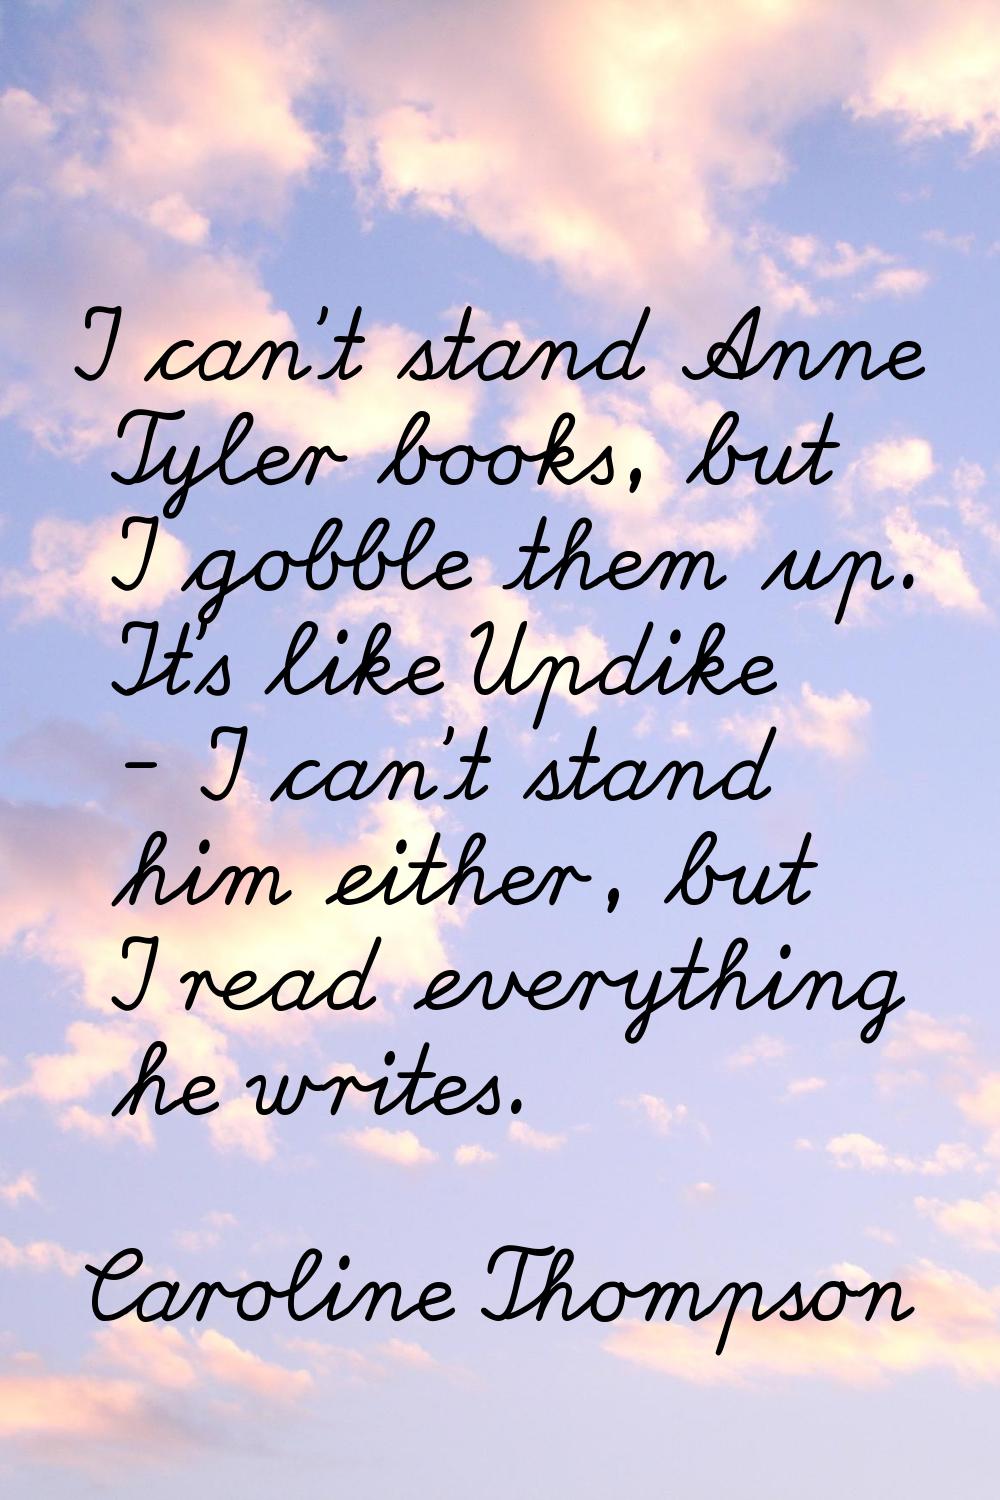 I can't stand Anne Tyler books, but I gobble them up. It's like Updike - I can't stand him either, 